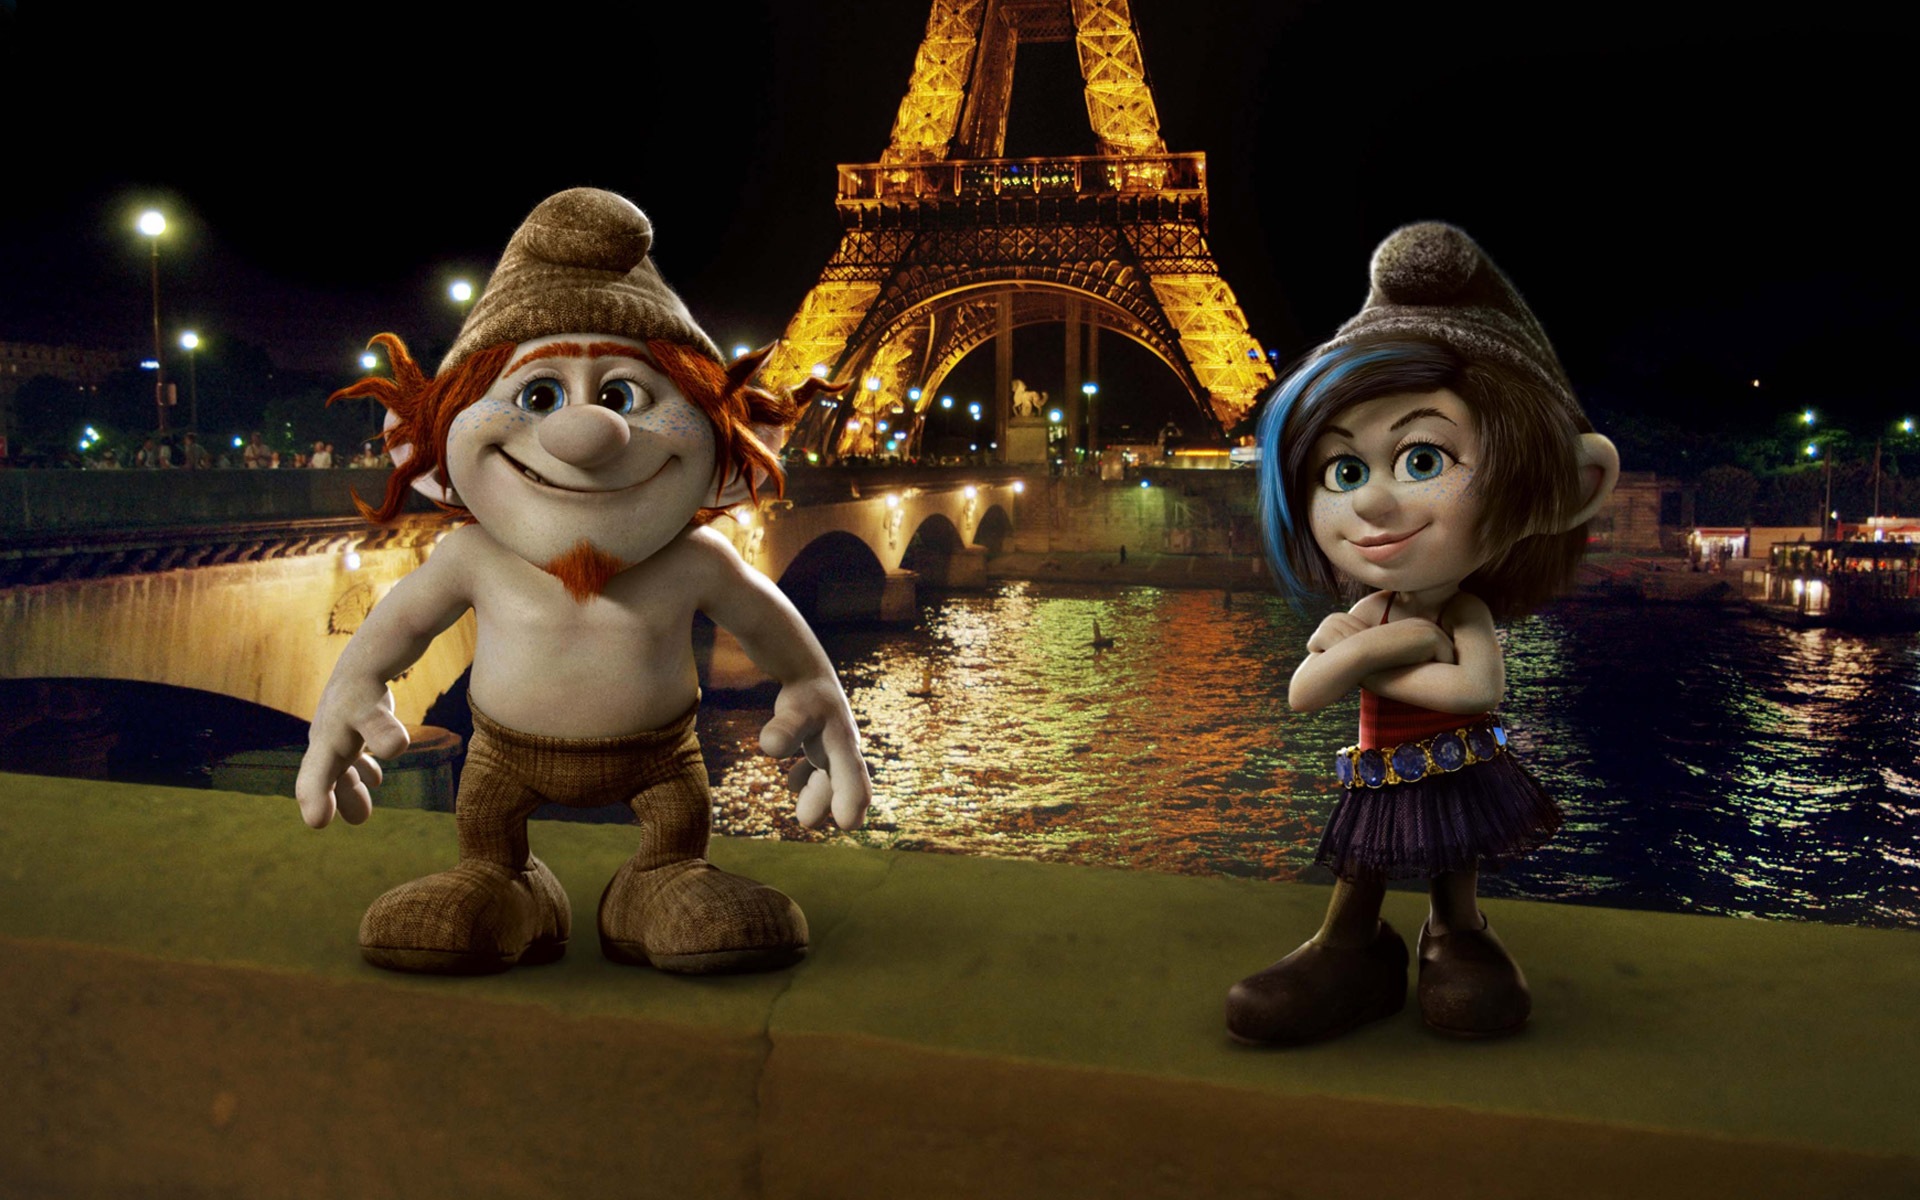 The Smurfs 2 HD movie wallpapers #6 - 1920x1200 Wallpaper ...